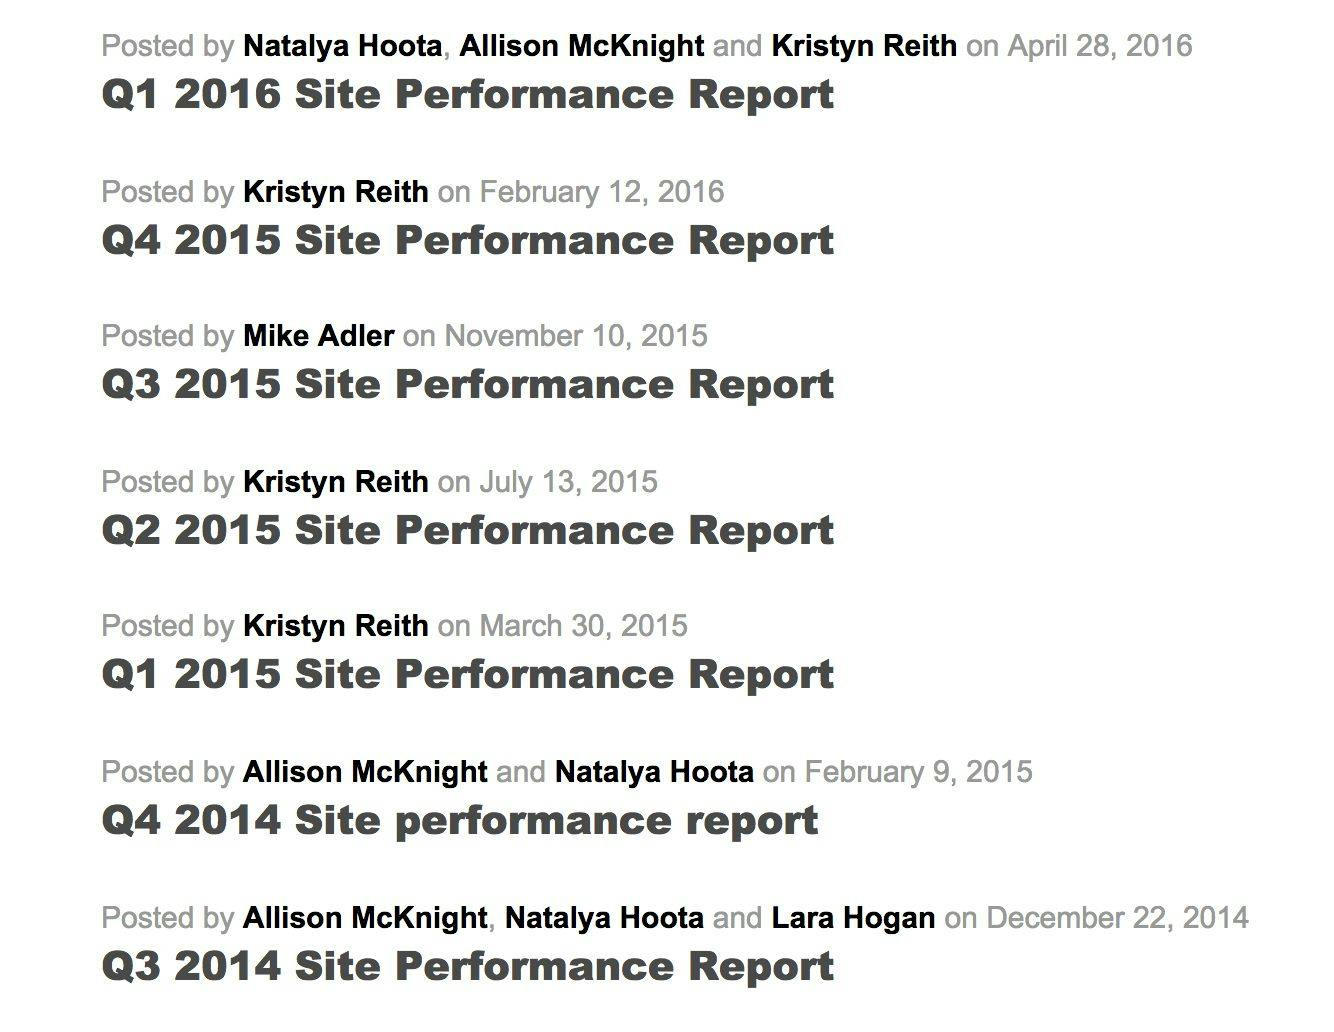 Site performance reports on Etsy's blog